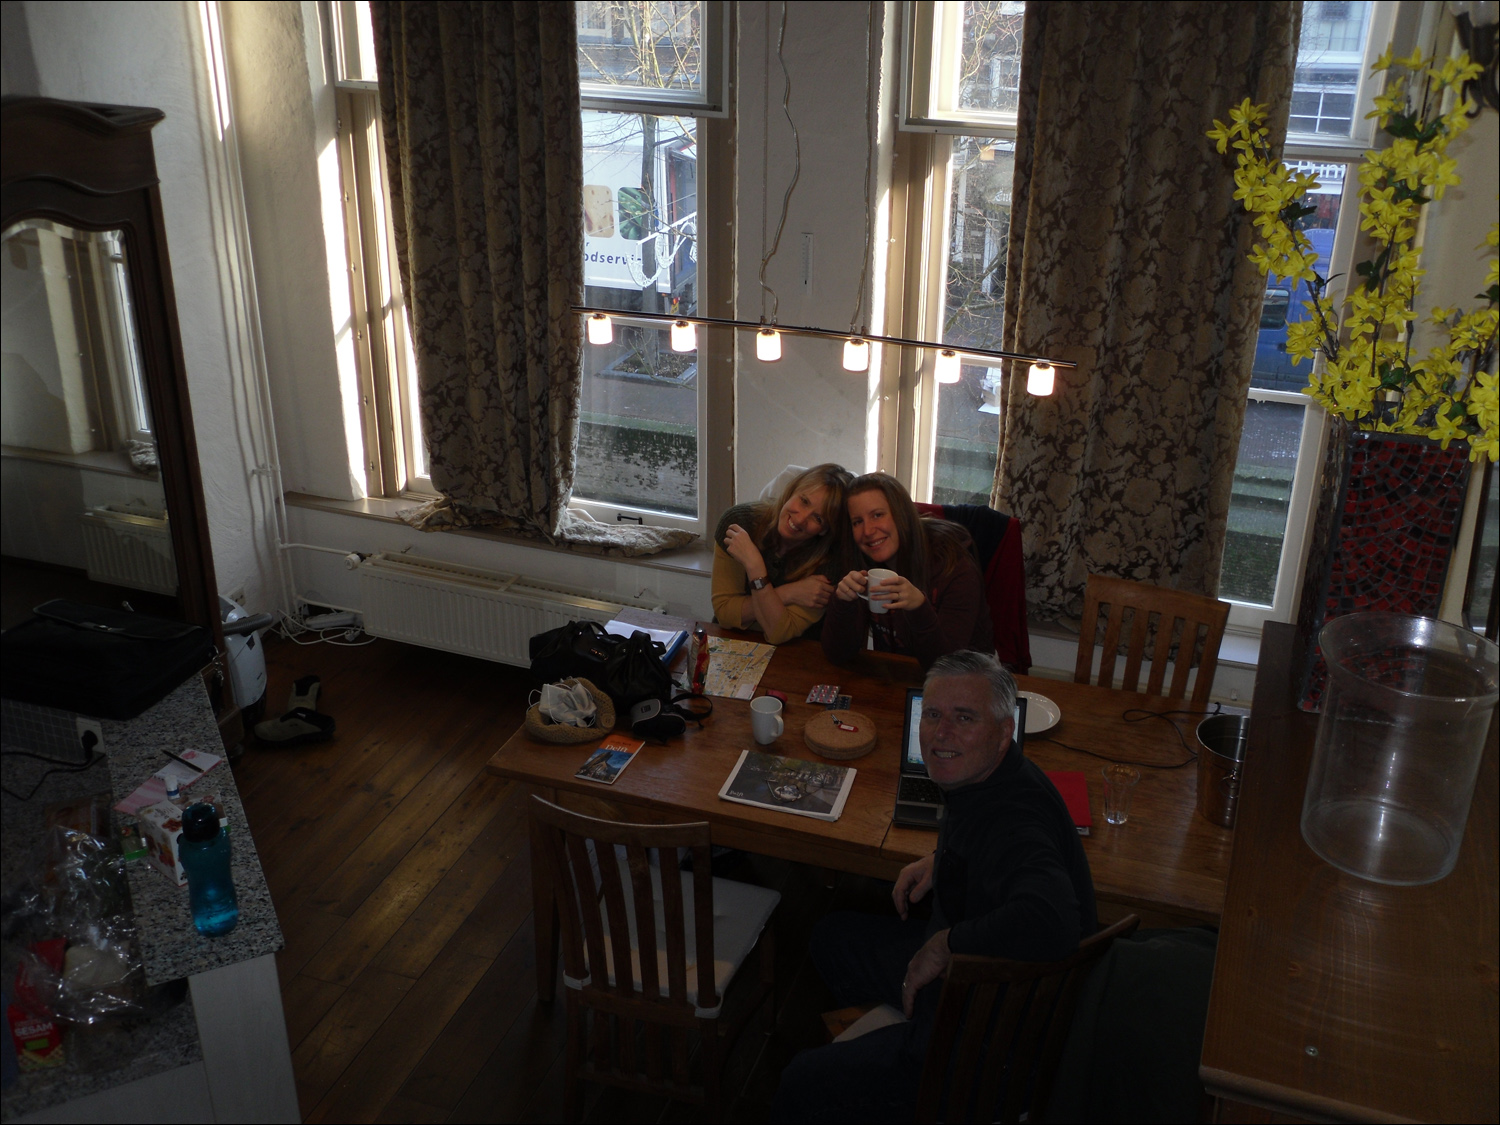 View of the 2nd floor dining room area @ our place in Delft.  L-R Sondra, Becky and Bob